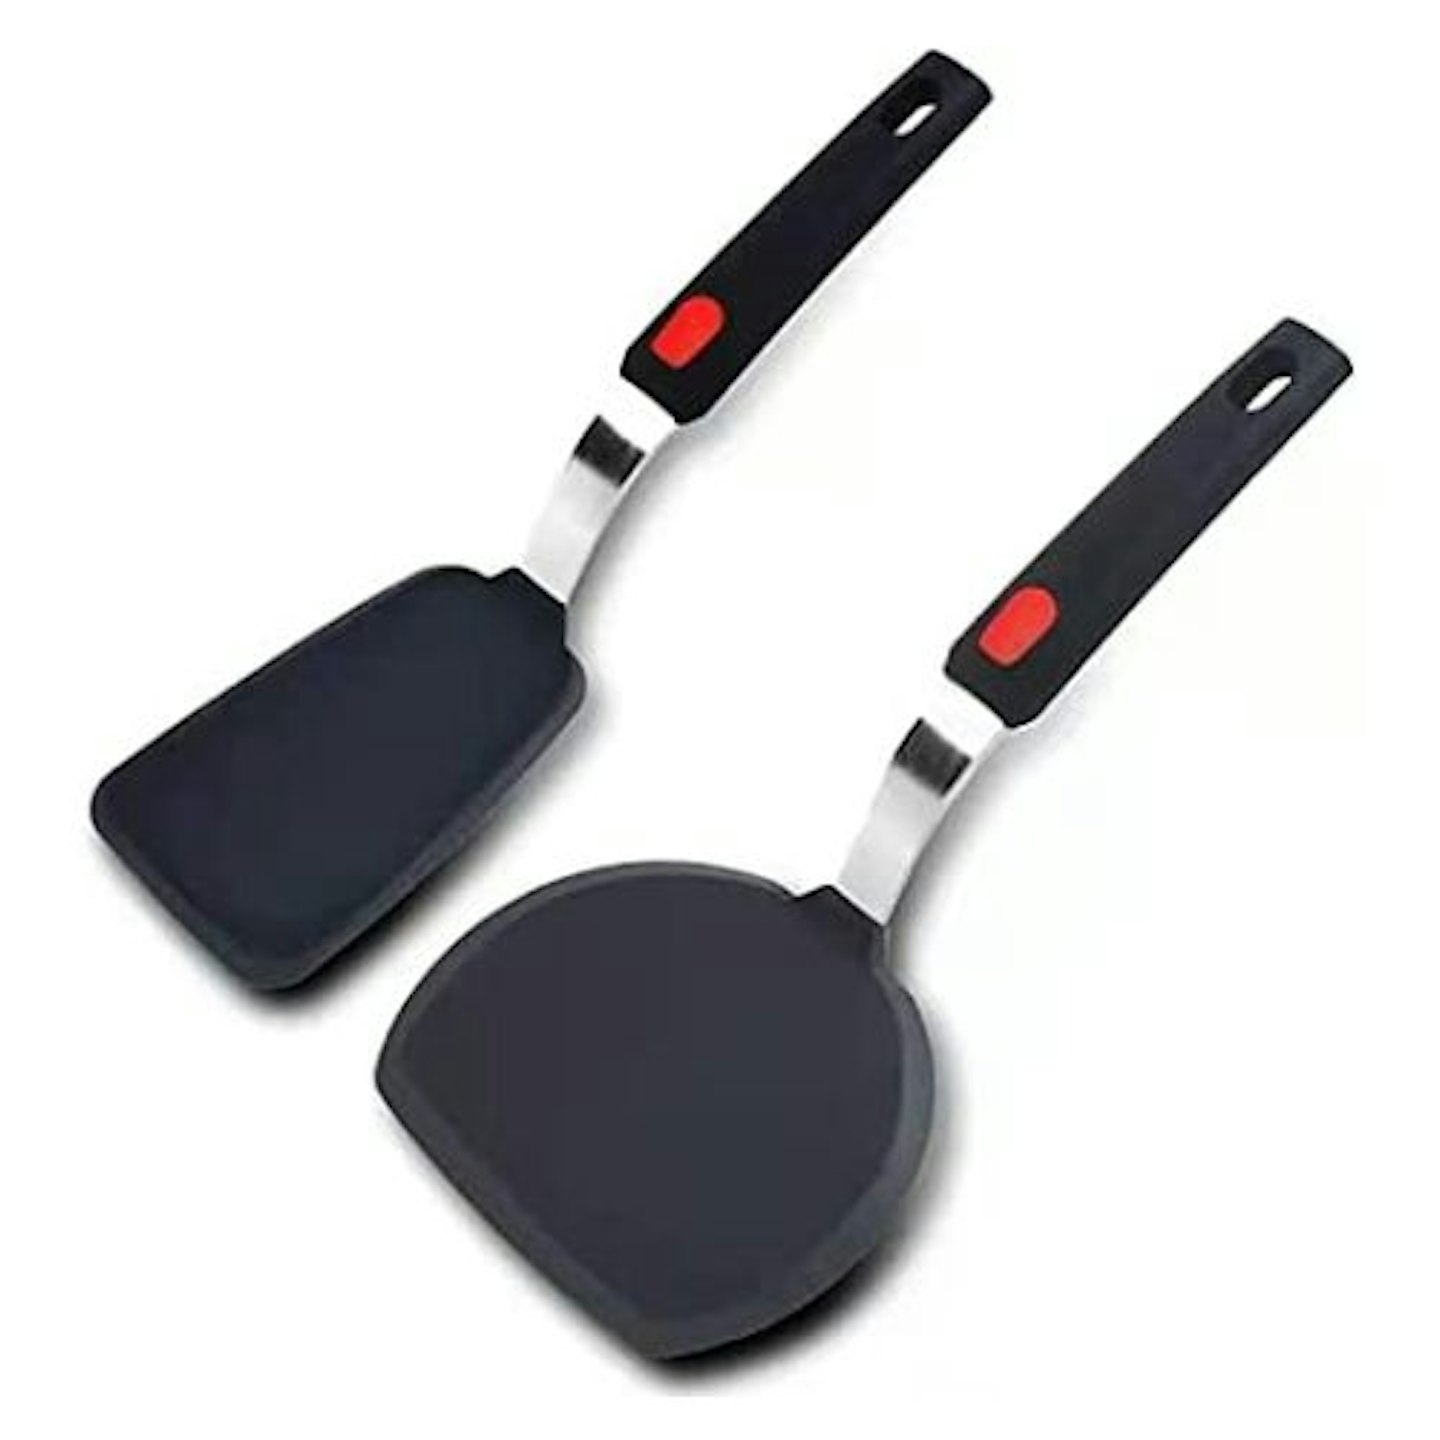 https://images.bauerhosting.com/affiliates/sites/10/2023/02/Tenta-Kitchen-Flexible-Silicone-Spatula-2-Pack-Silicone-Classic-Spatula-Kitchen-Turner-Utensils-for-Flipping-Eggs-Pancake-Burgers-Crepes-and-More....jpg?auto=format&w=1440&q=80